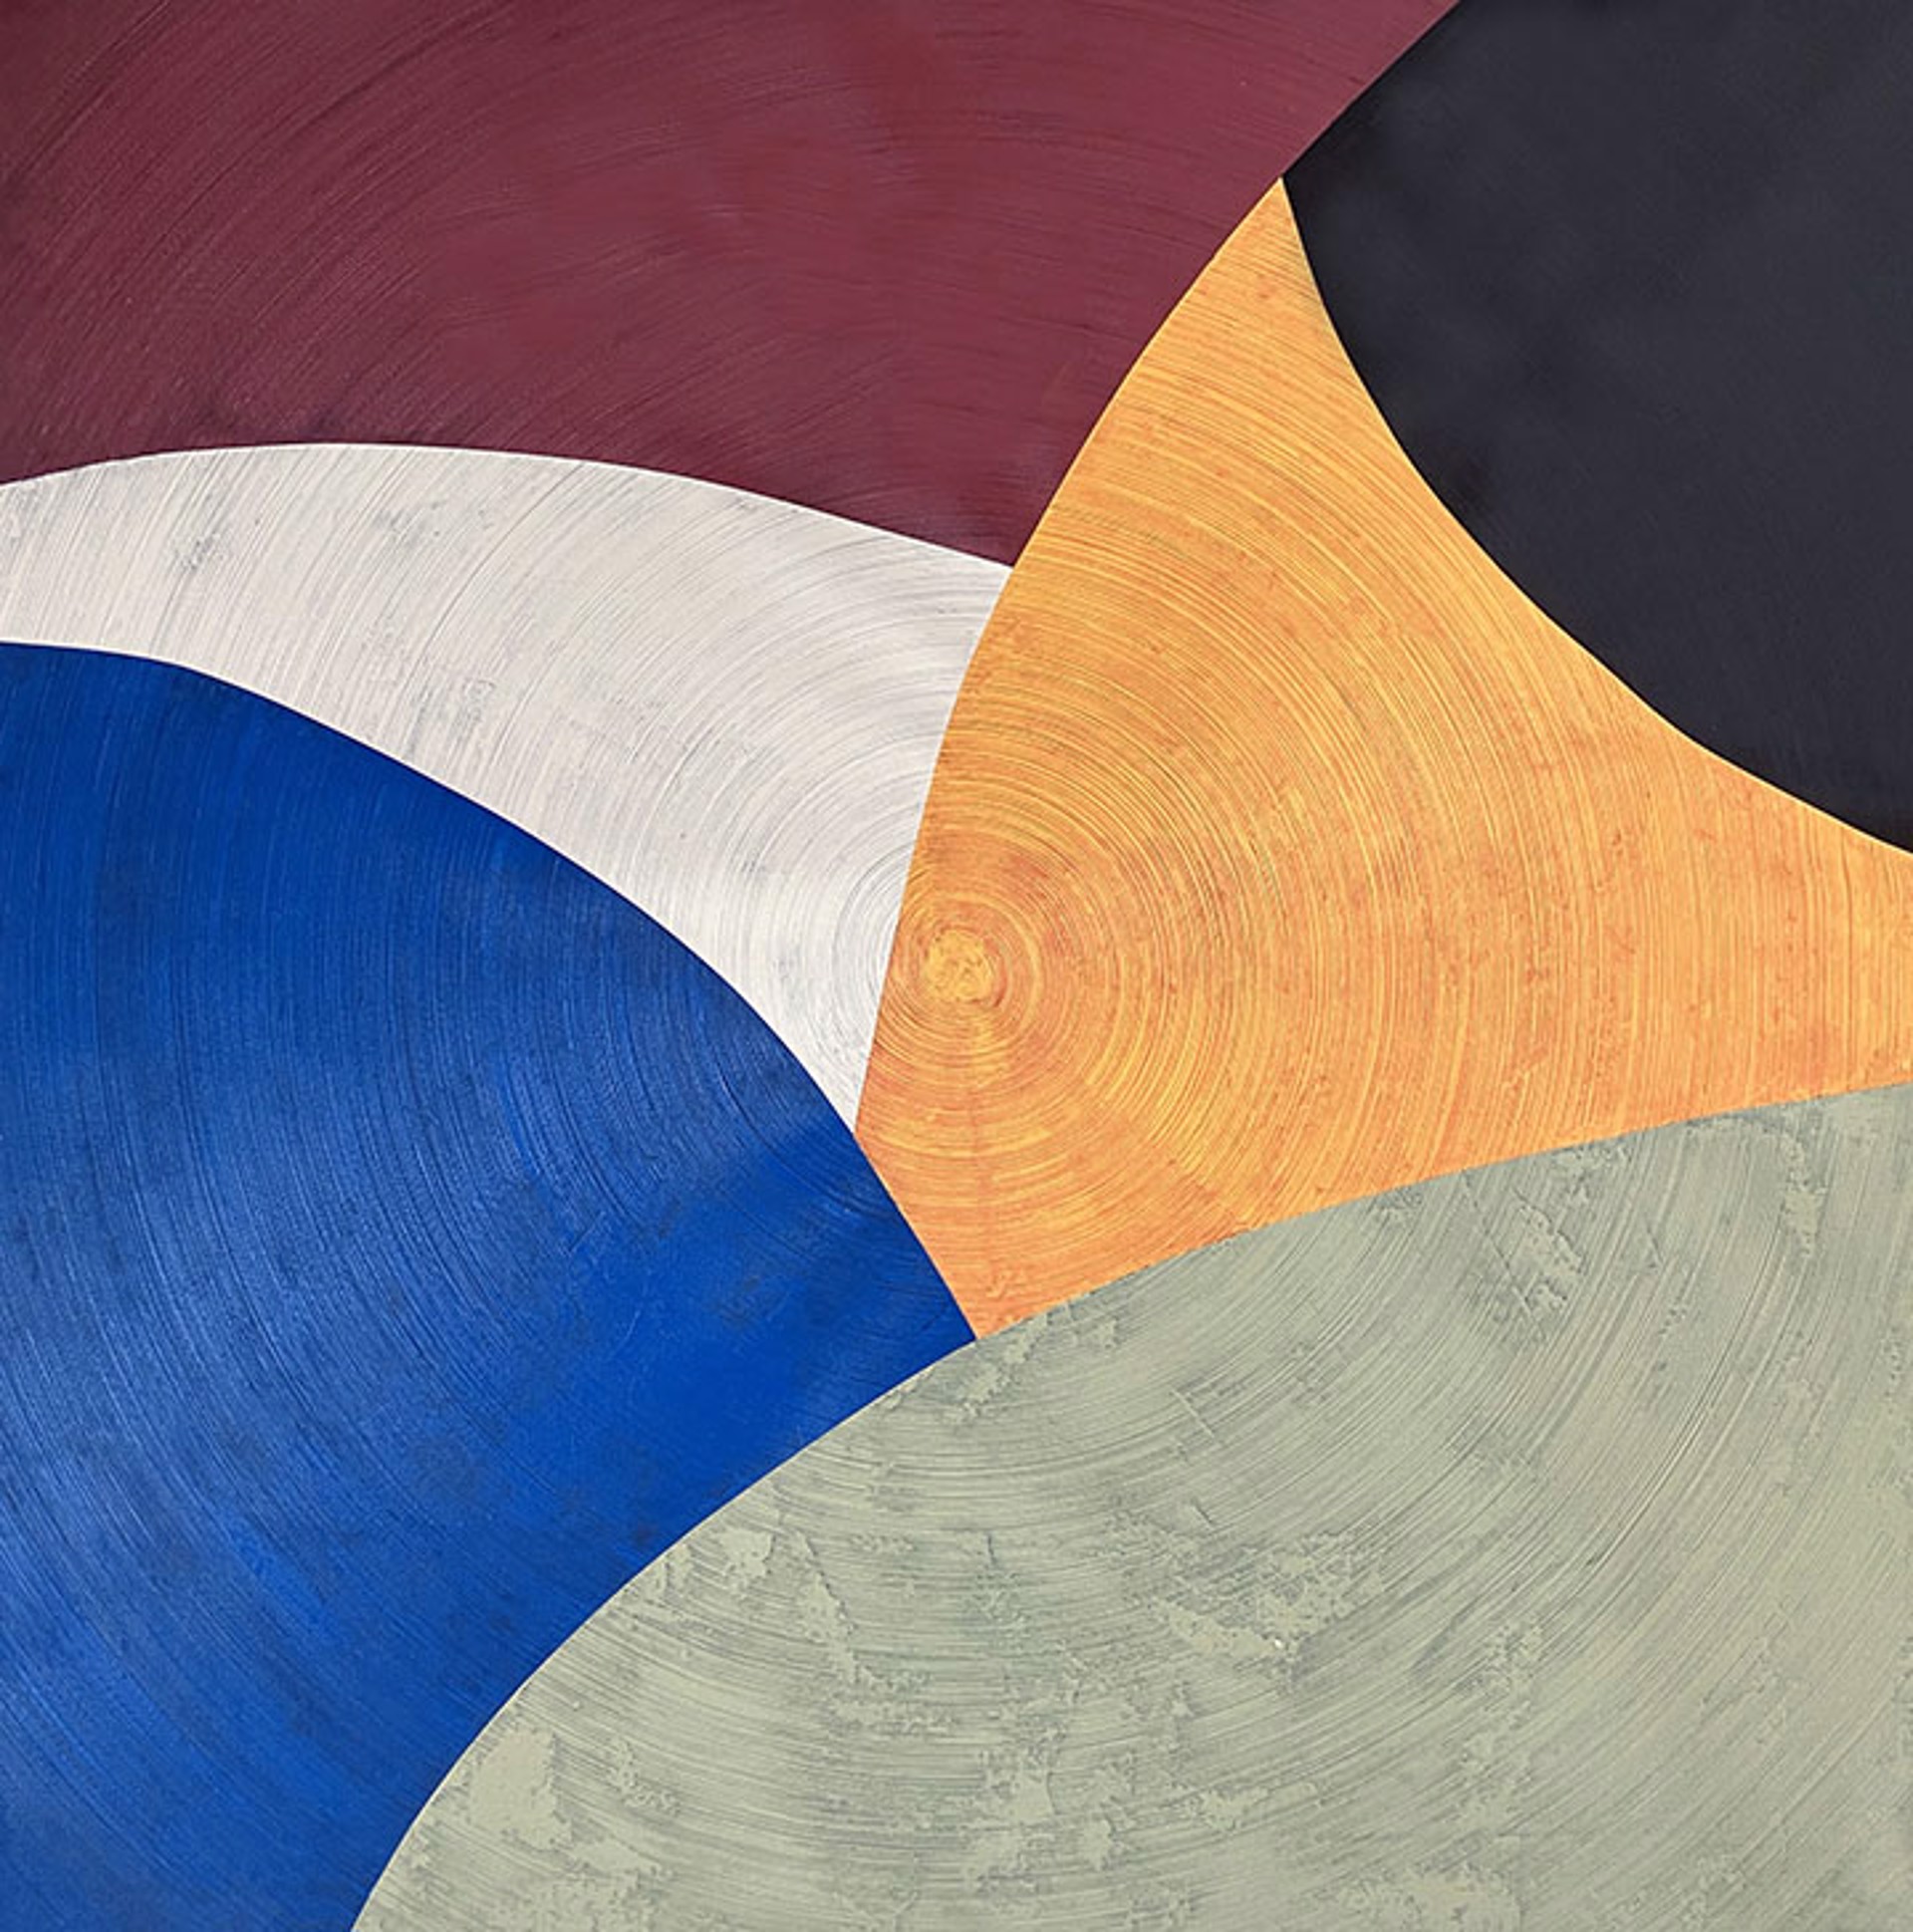 A painting by David Skillicorn with overlapping blue, white, black, orange, burgundy and green circles.